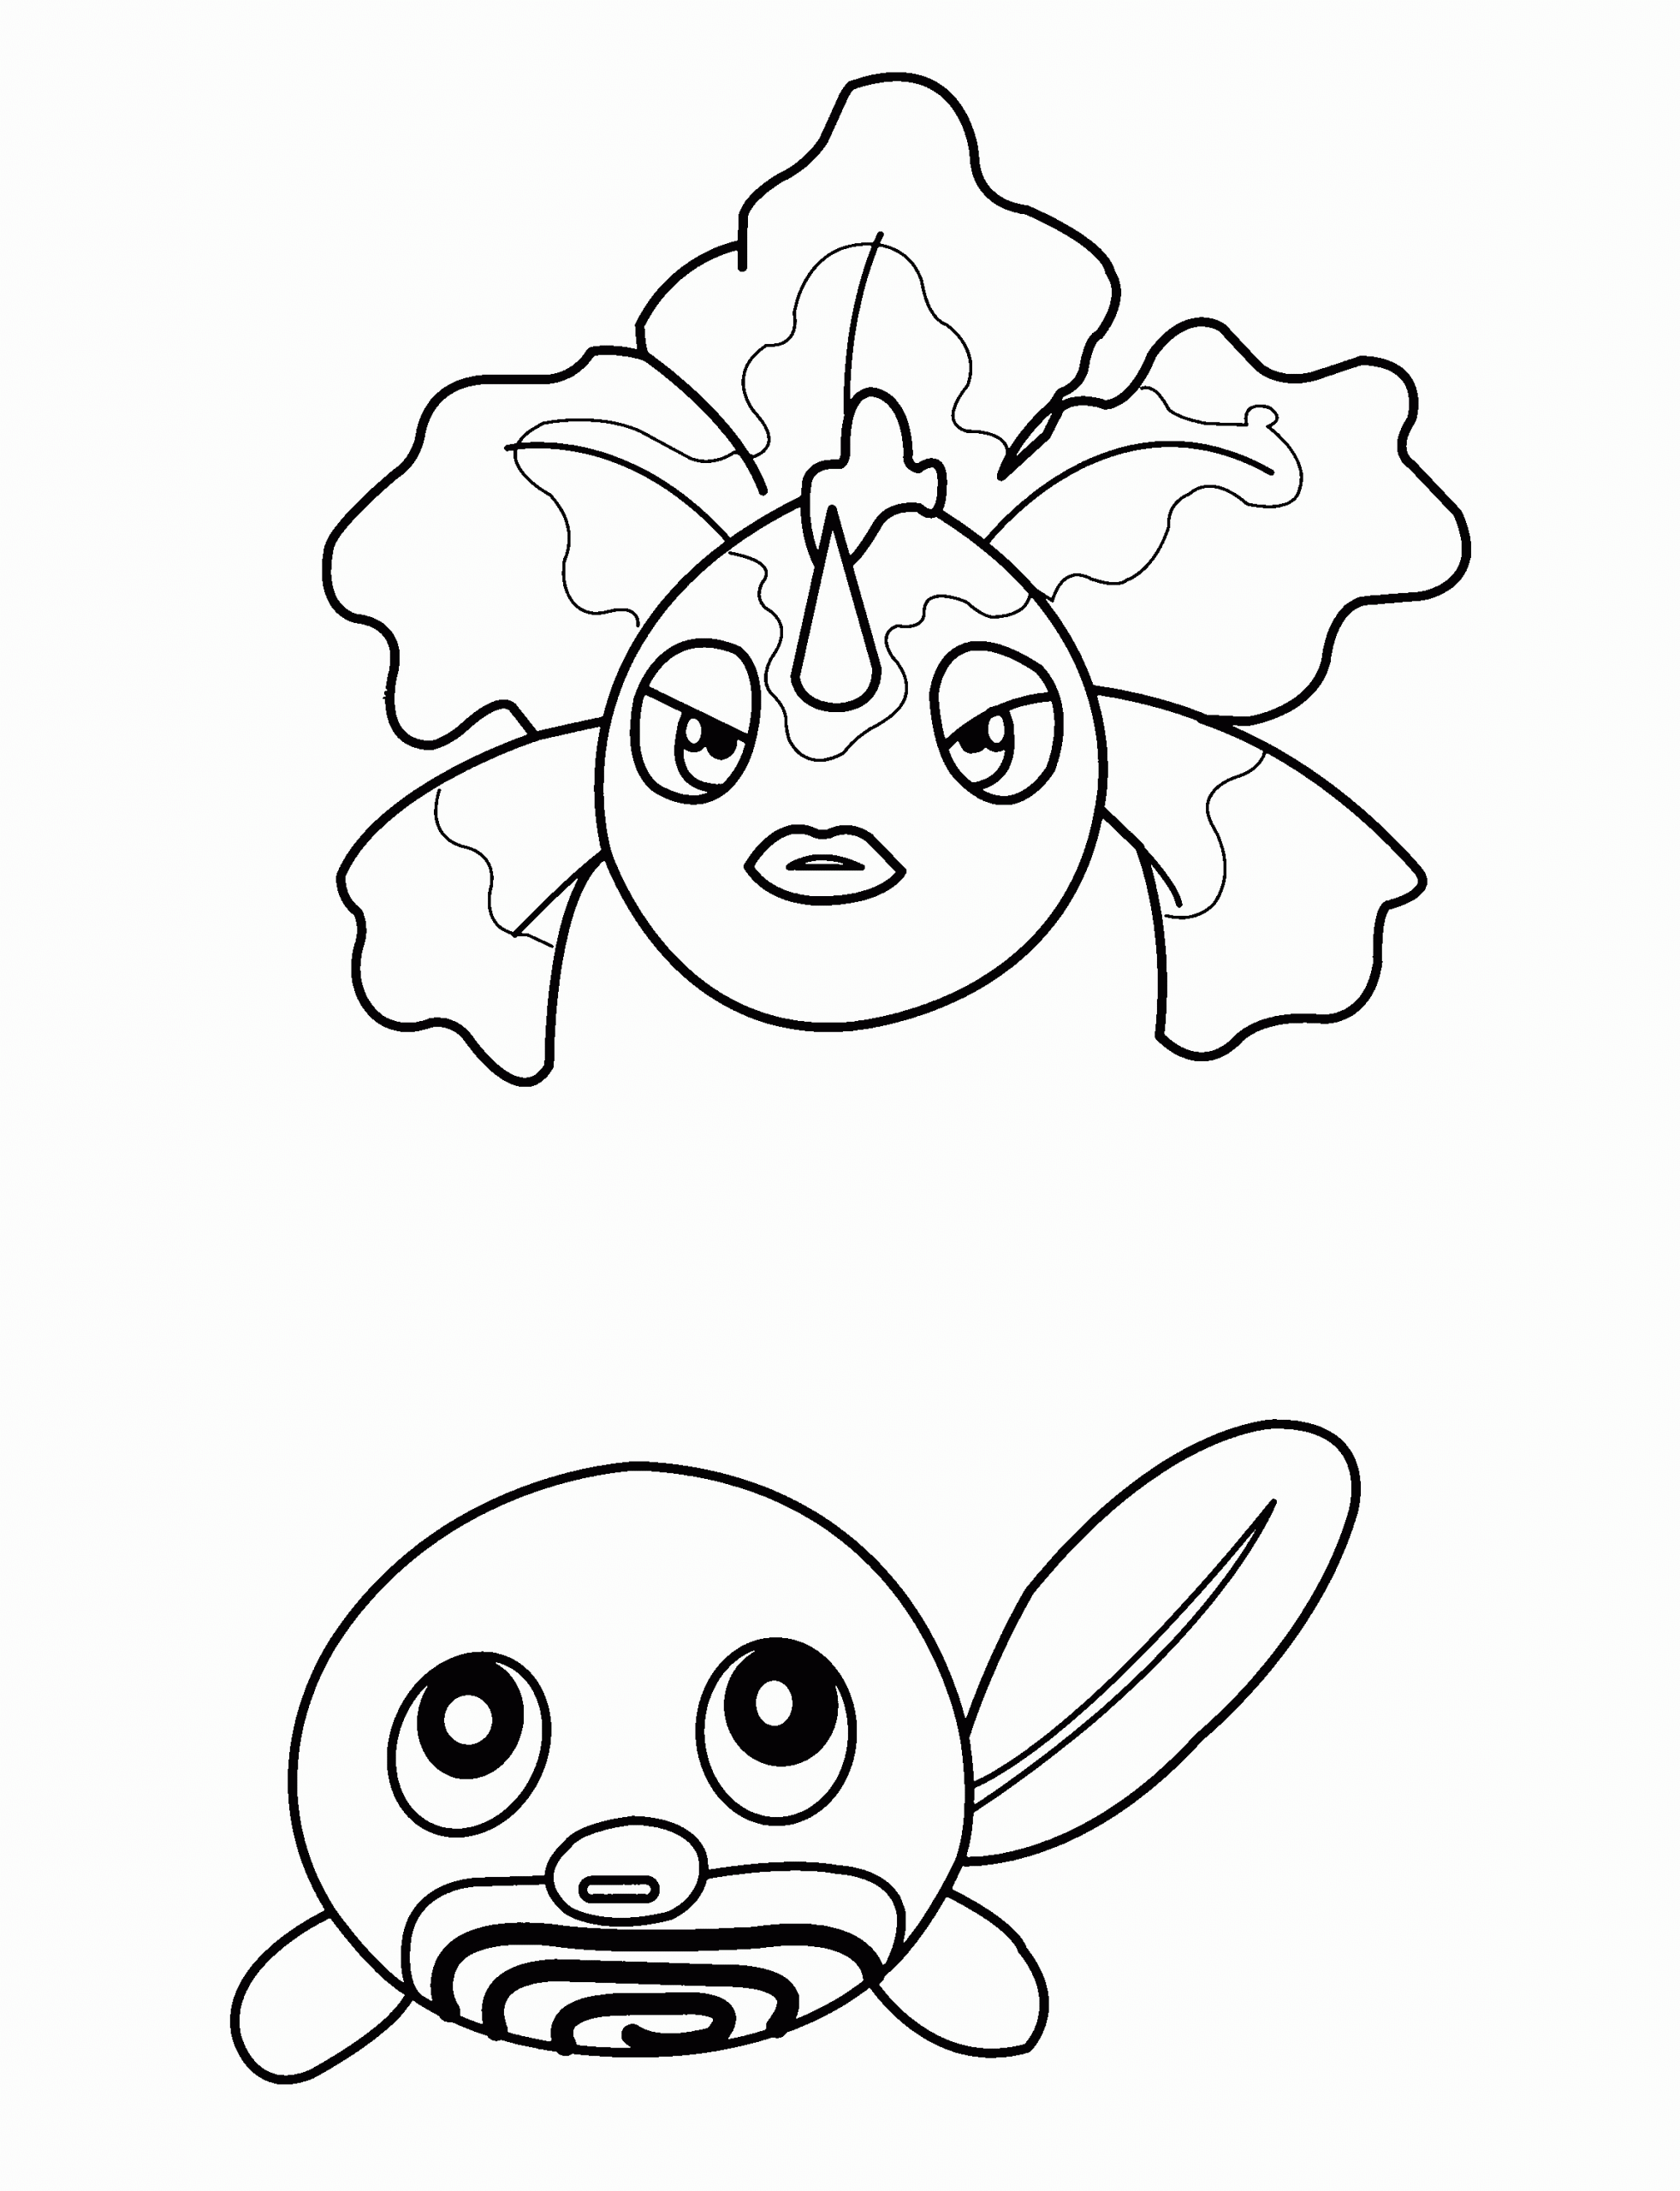 Squirtle Pokemon Coloring Page Lovely Luxe Kleurplaten Pokemon Squirtle Pokemon Color